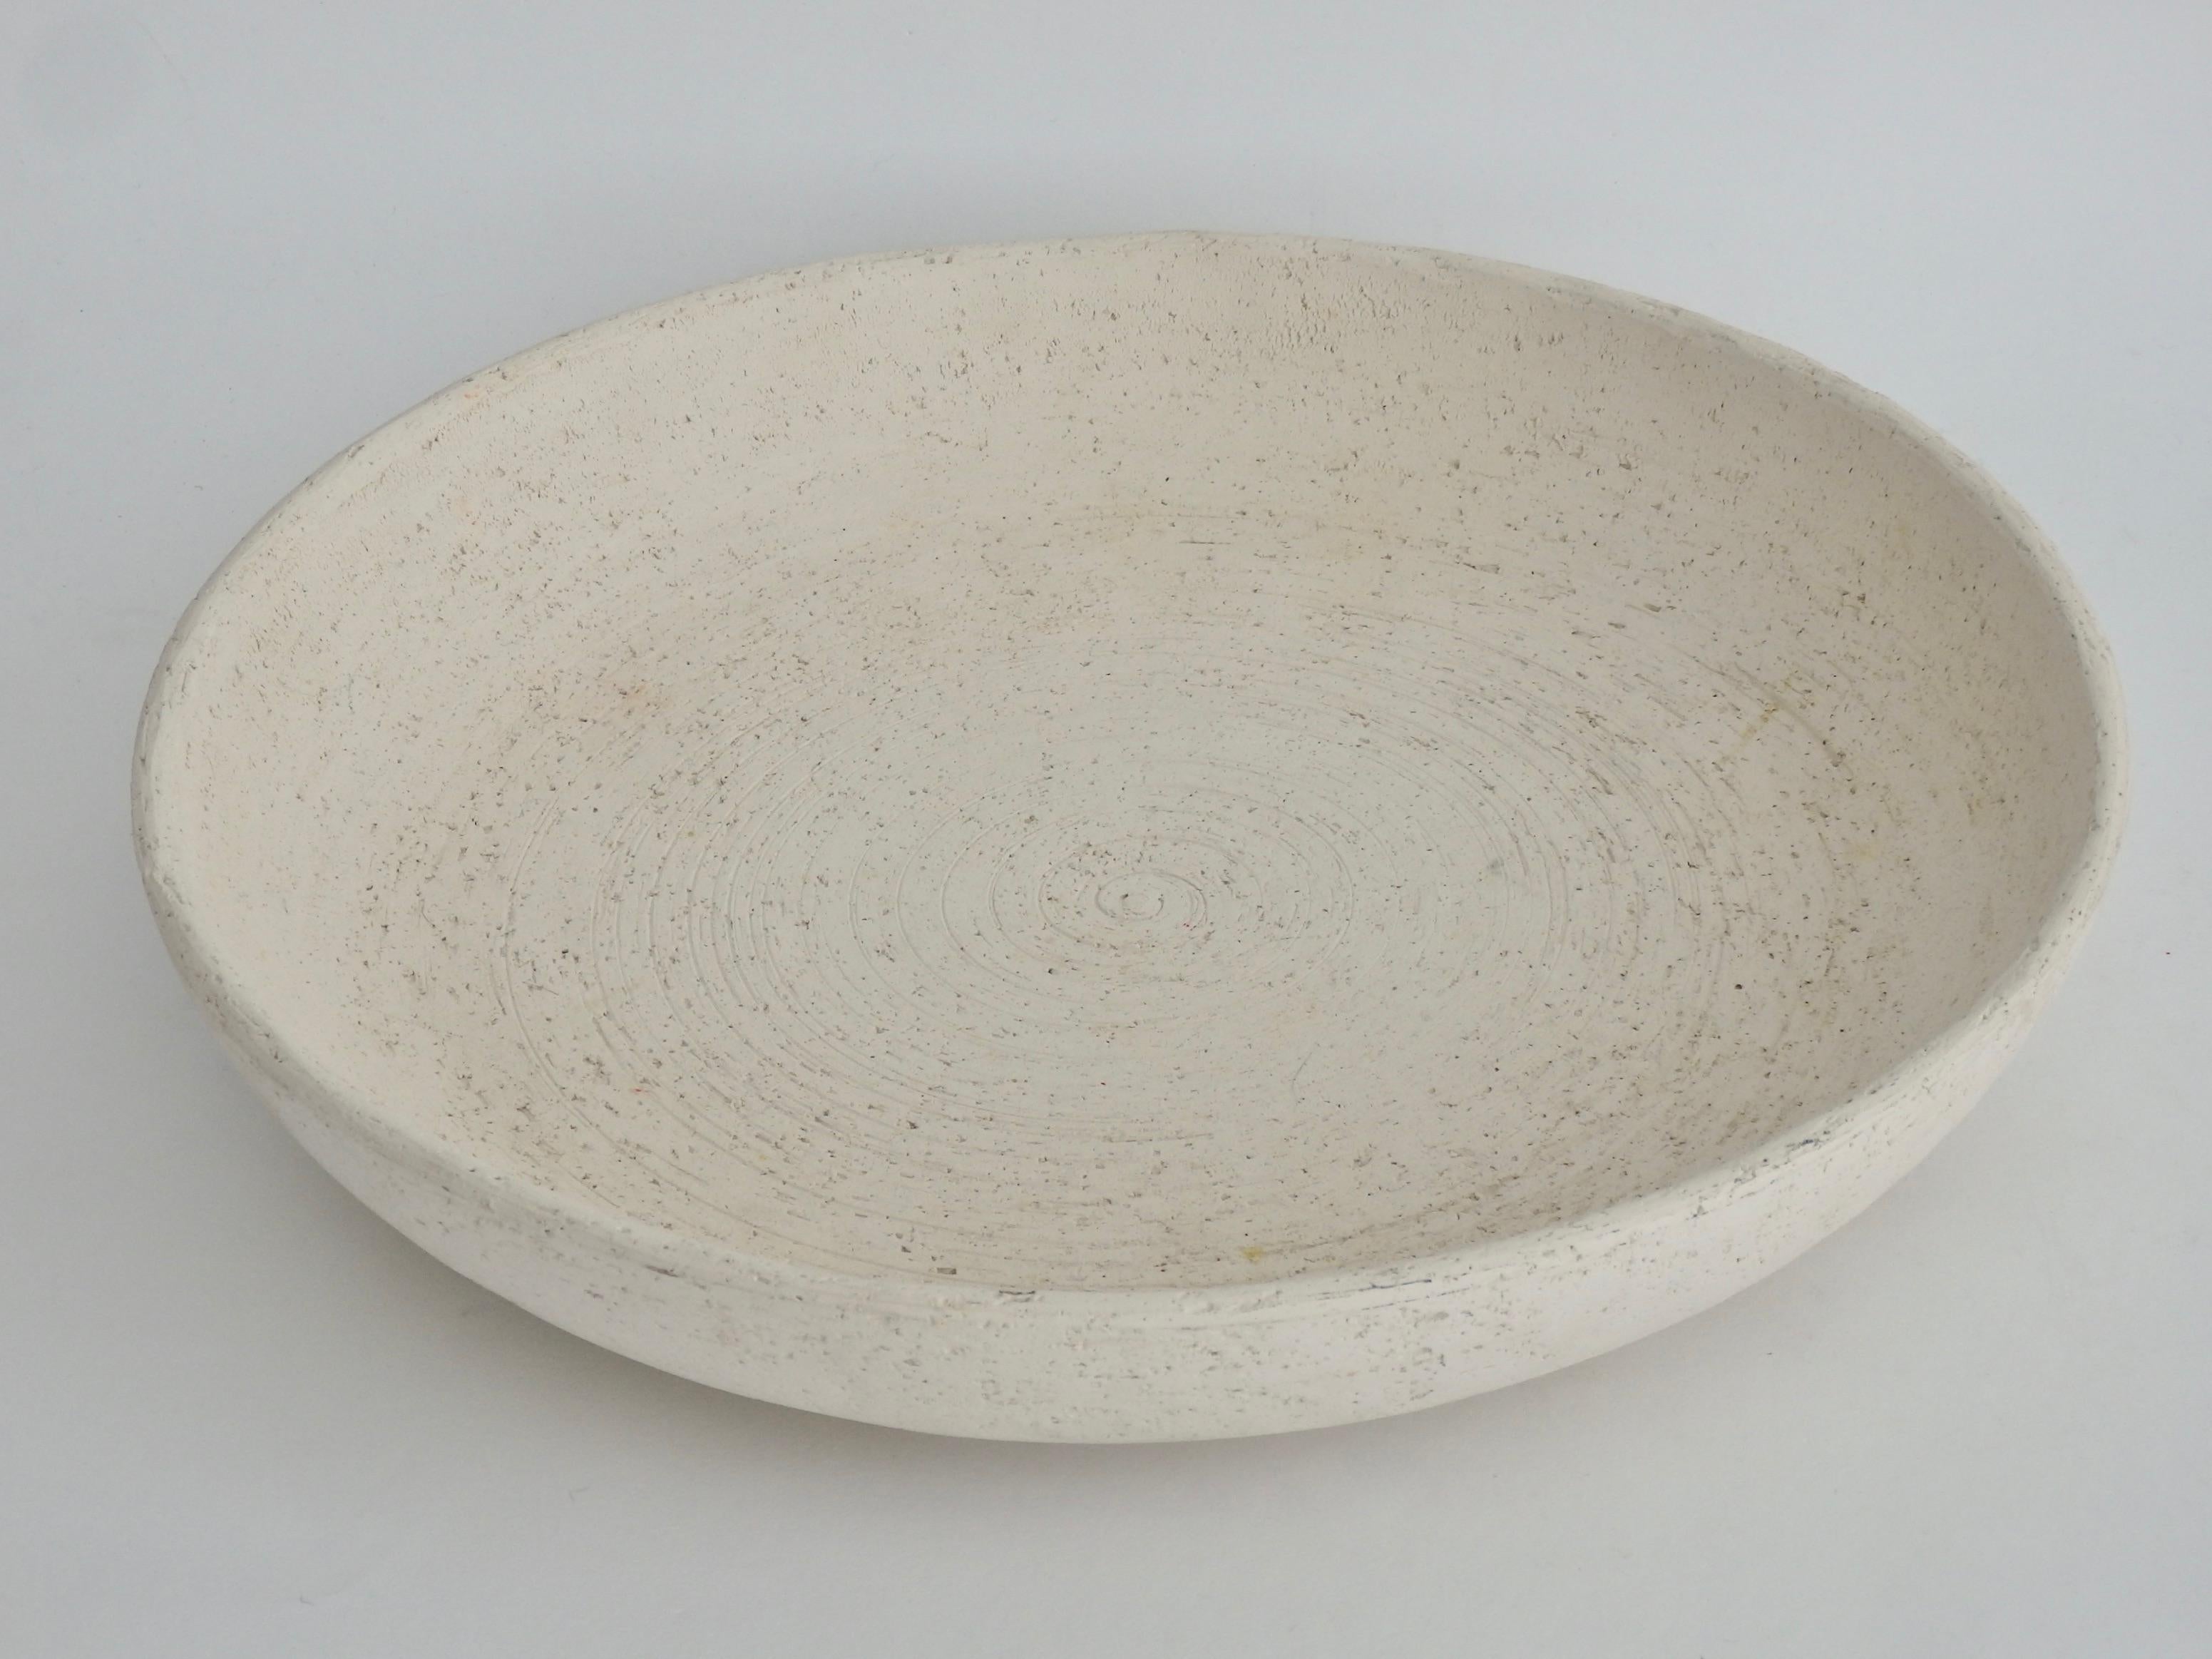 A timely and classic Flavia Montelupo Italian fruit bowl in parchment white. An unglazed, earthenware terracotta bowl that is porous by nature giving a textural look and feel.
Founded in 1921 by Guido Bitossi, Montelupo was under the artistic